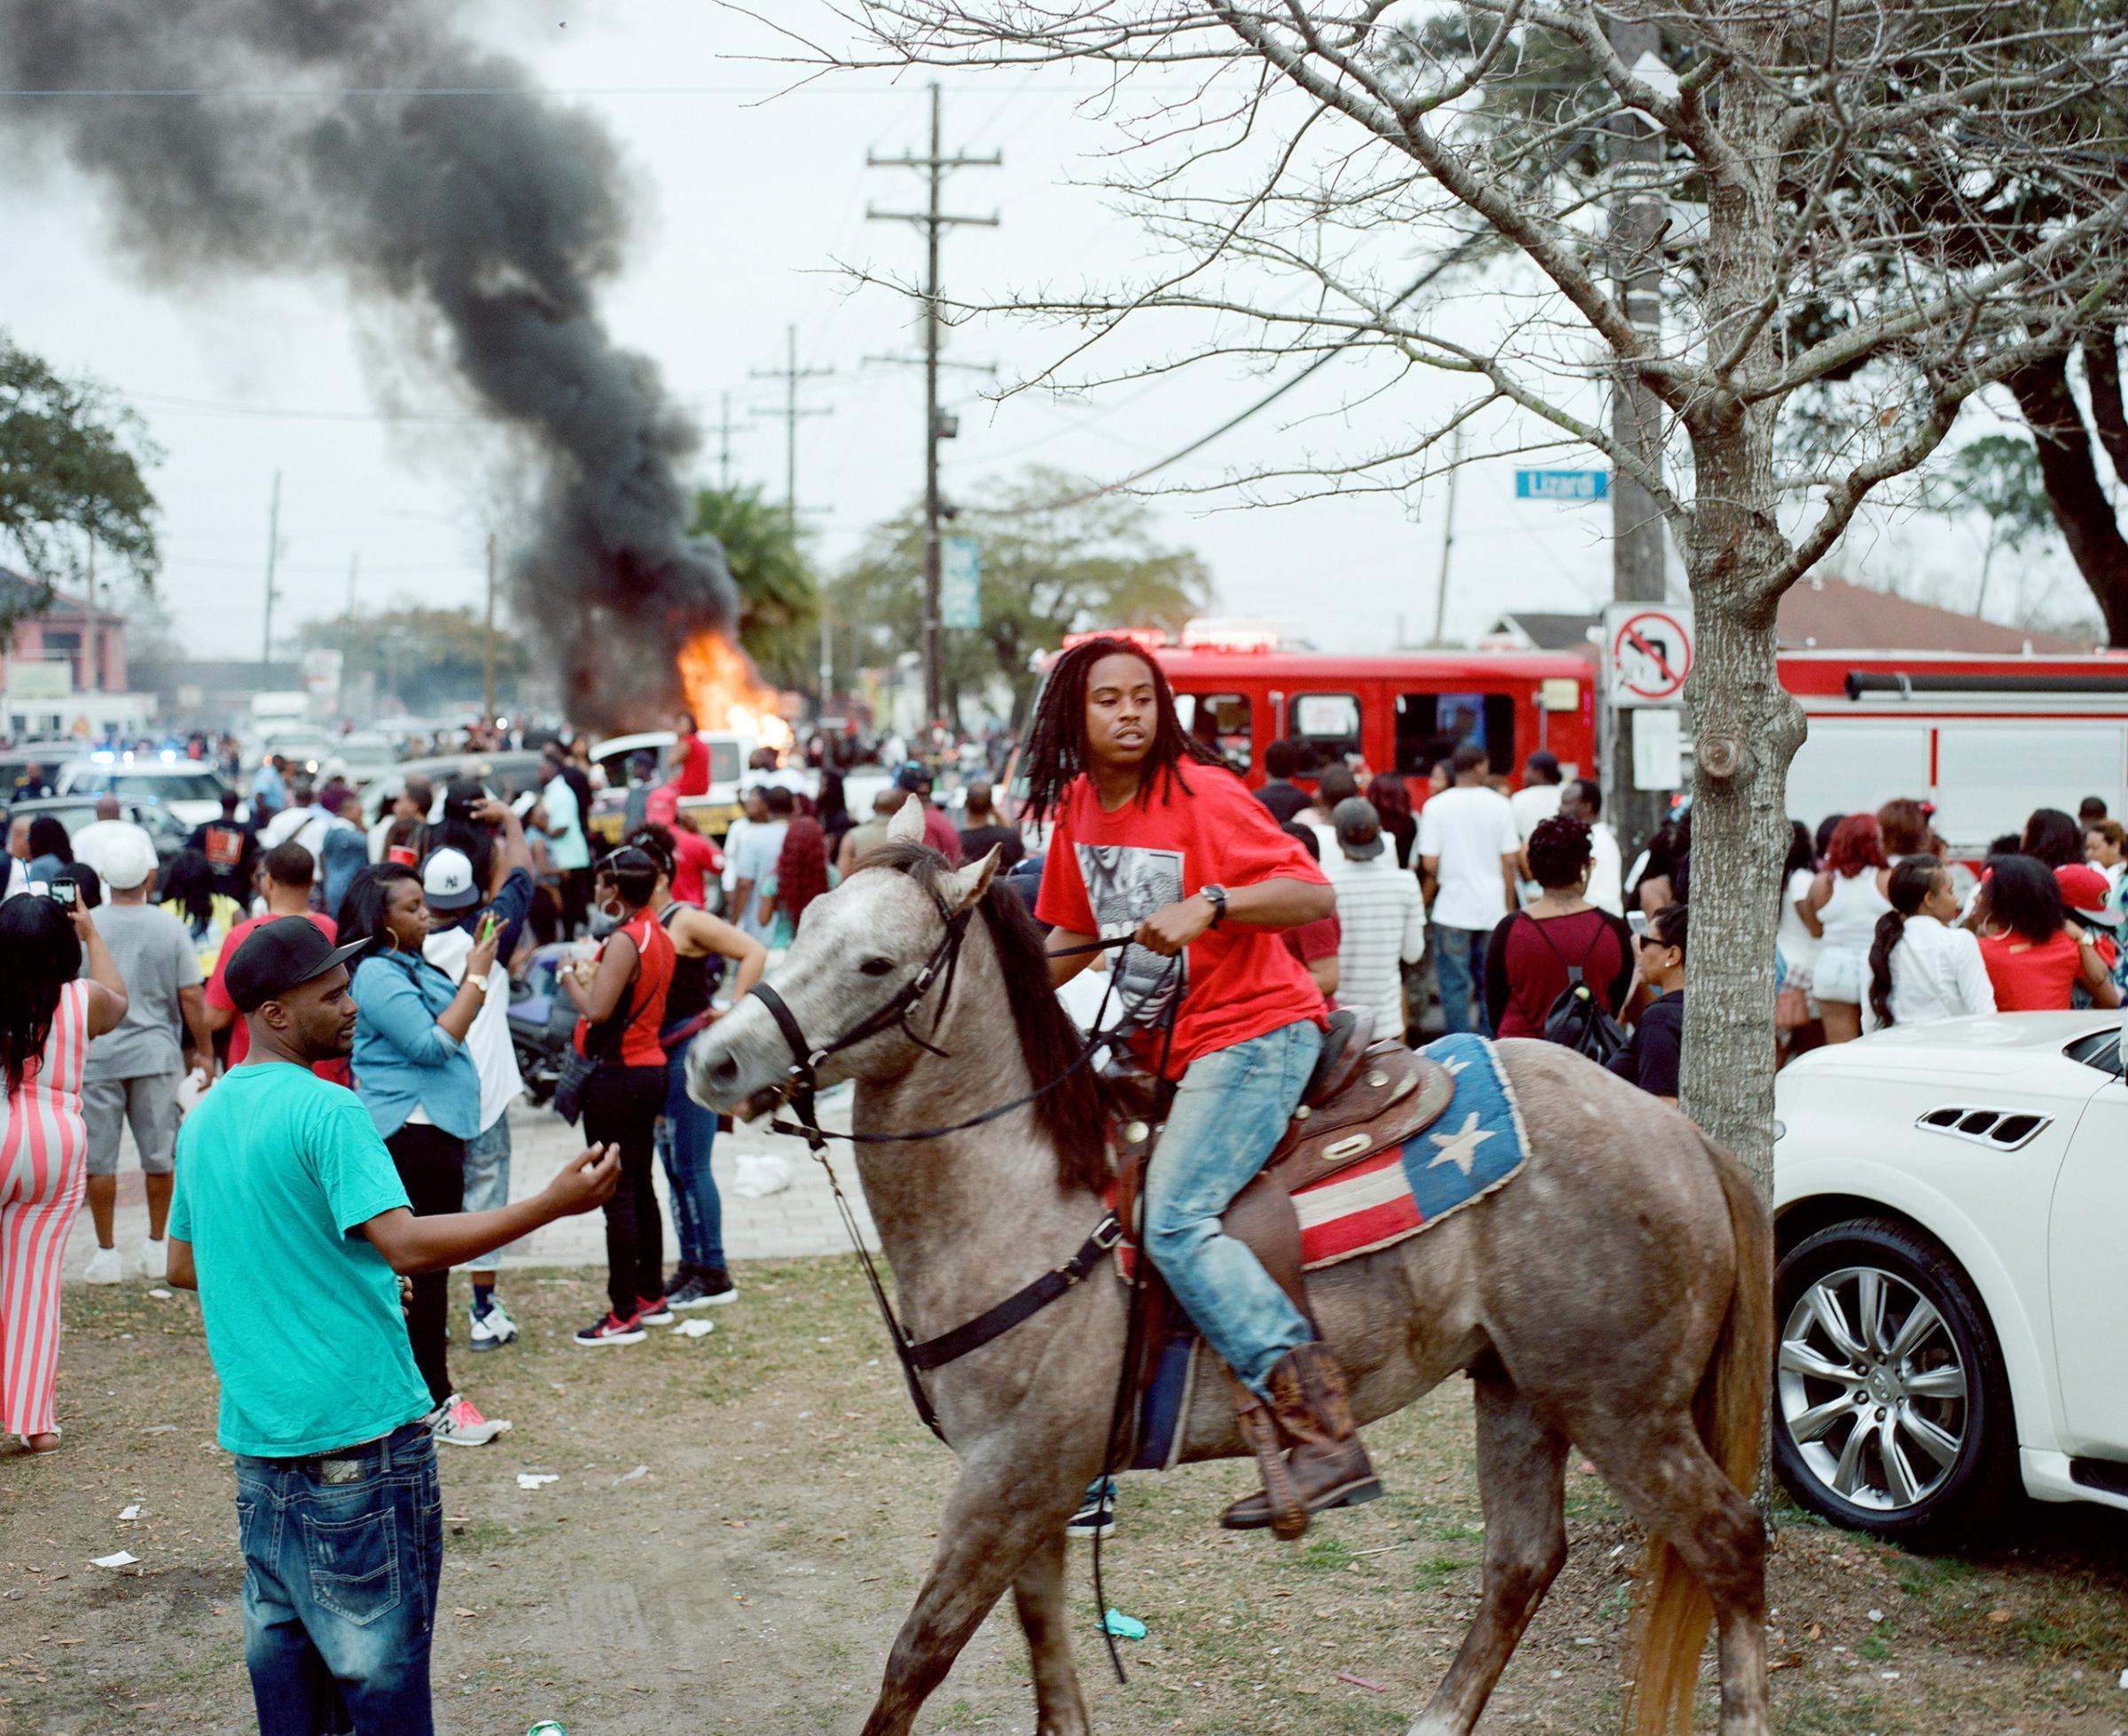 A young man on horseback at a Second Line moves away from a burning car in Holy Cross, Louisiana. 2016